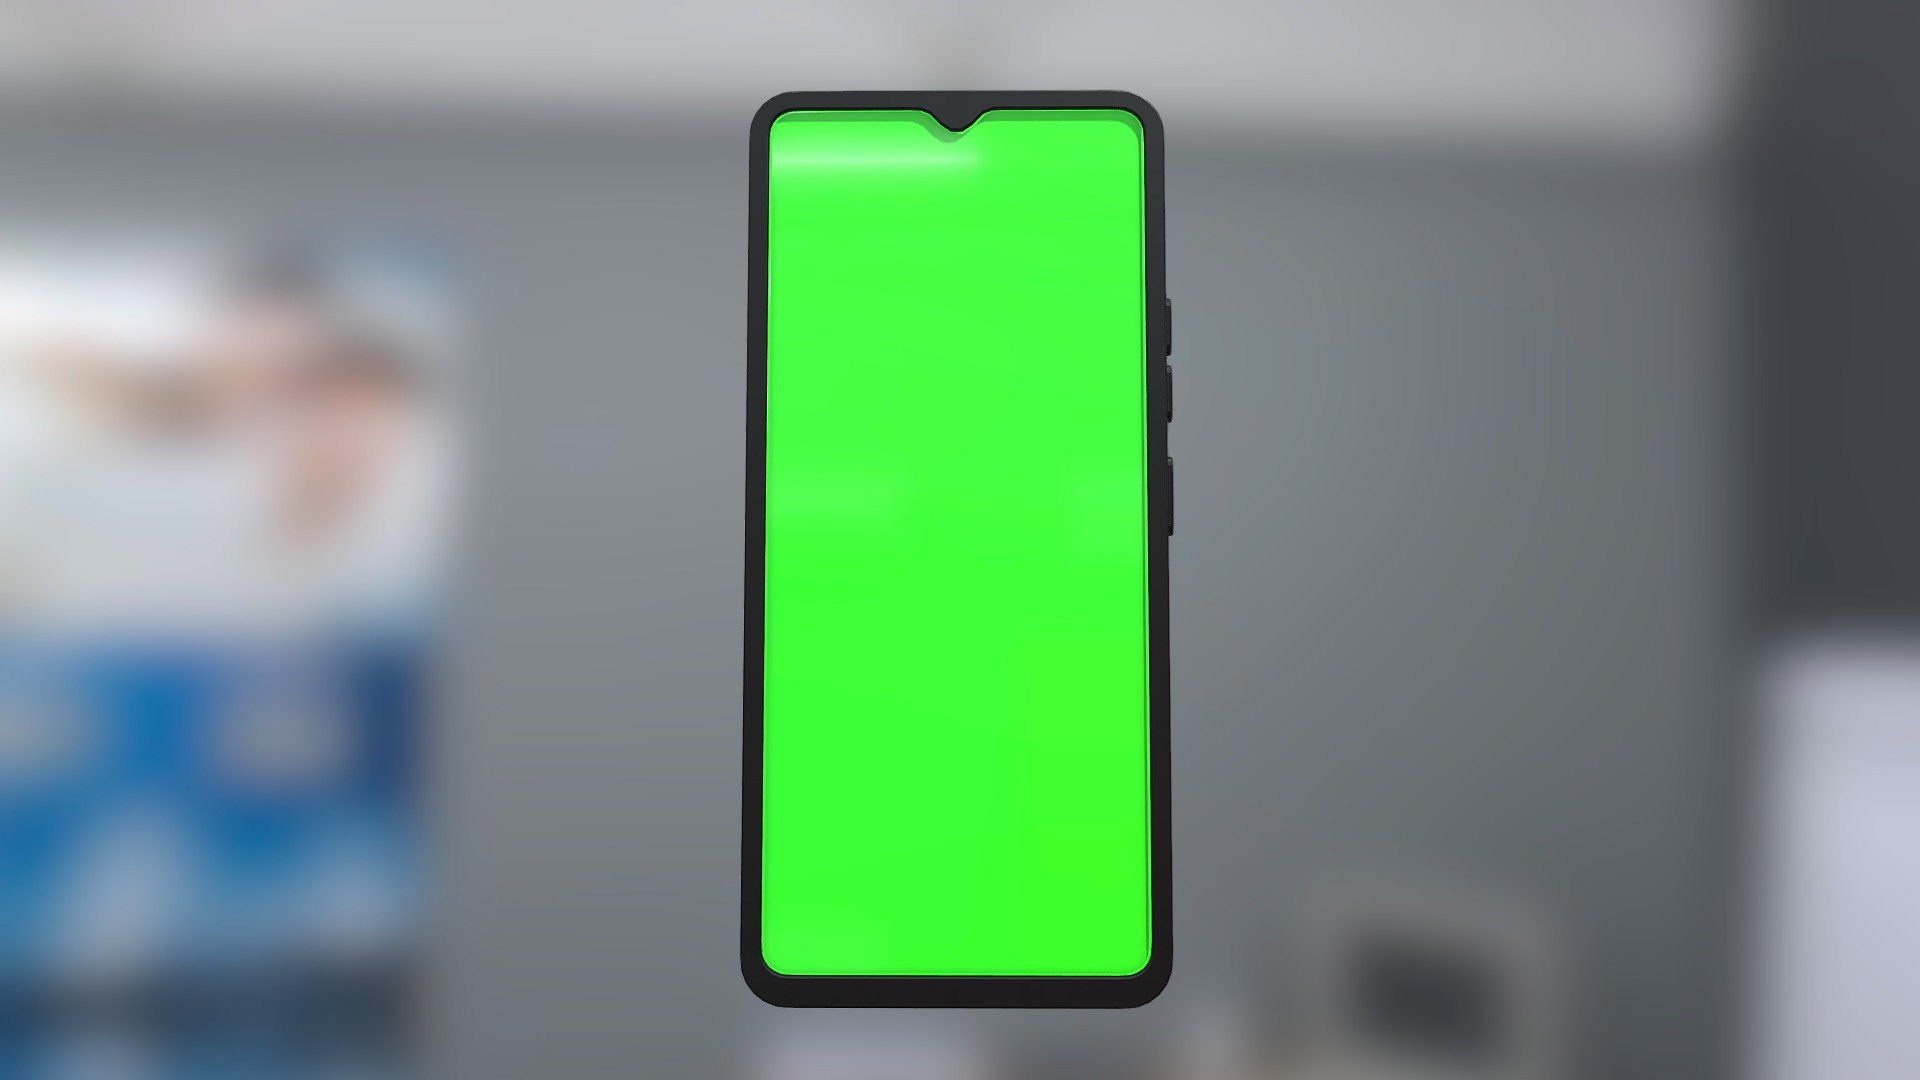 A low poly model 3D smartphone.


Has greenscreen
Has FBX file with embedded textures
Has OBJ and MTL files with Textures folder
The phone is Aluminum dark grey while the rest is glossy plastic.
The glass effect is done here in sketchfab, which means the default glass color should be blue.
DOES NOT HAVE A CHARGING PORT
DOES NOT HAVE A HEADPHONE JACK
DOES NOT HAVE SPEAKER HOLES
DOES NOT HAVE MICROPHONE HOLES

Inspired by the &ldquo;Coolpad COOL 20